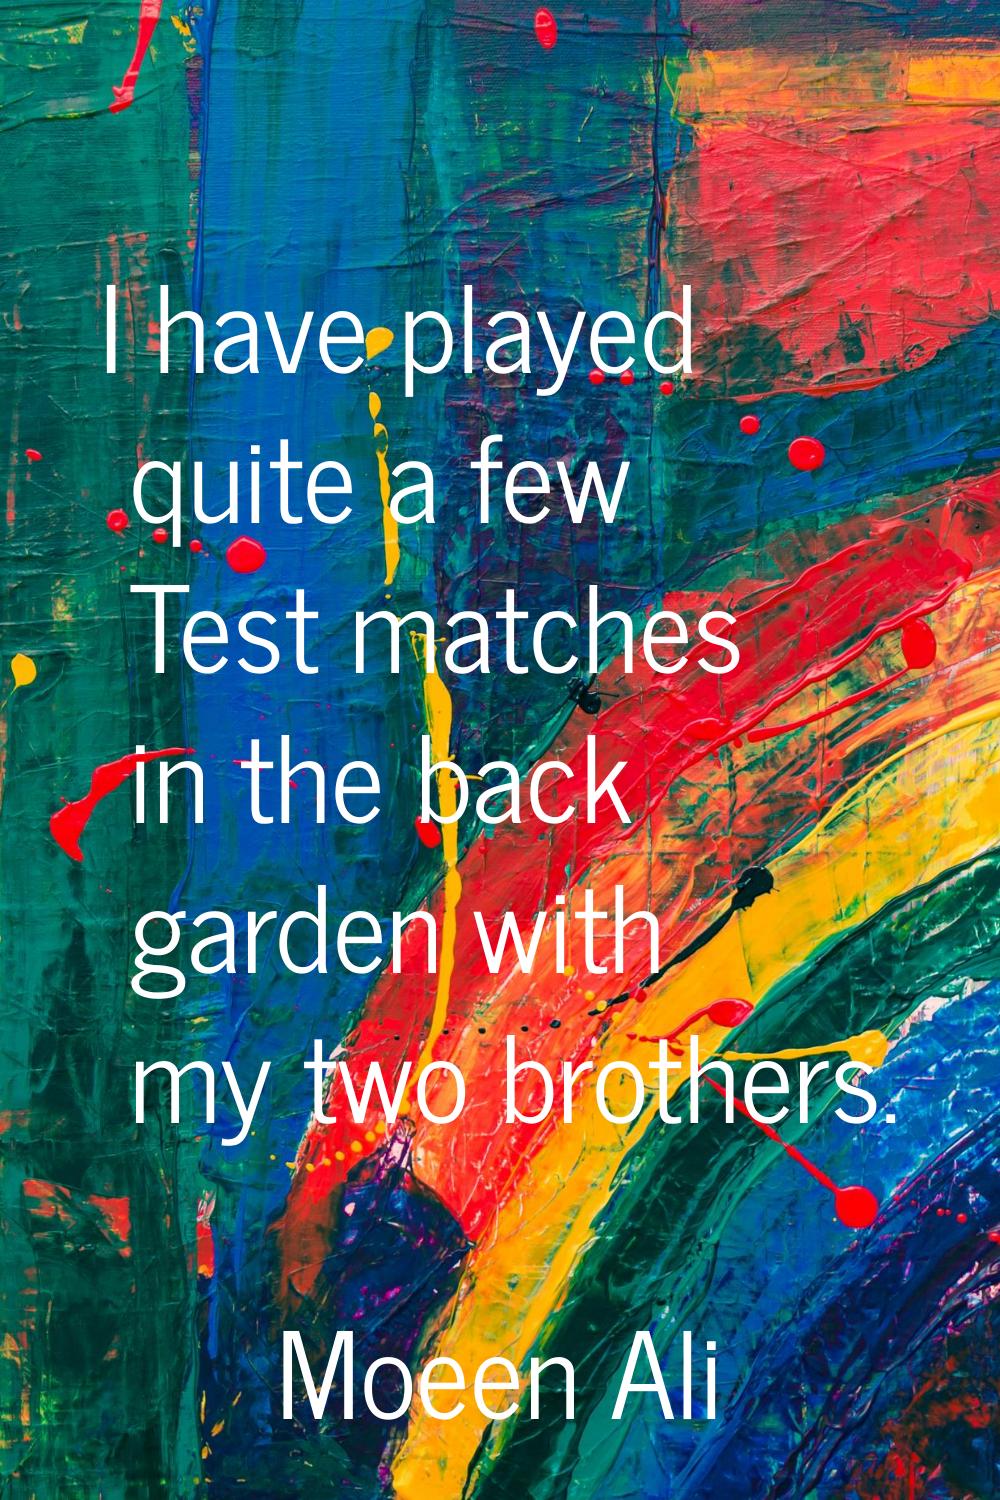 I have played quite a few Test matches in the back garden with my two brothers.